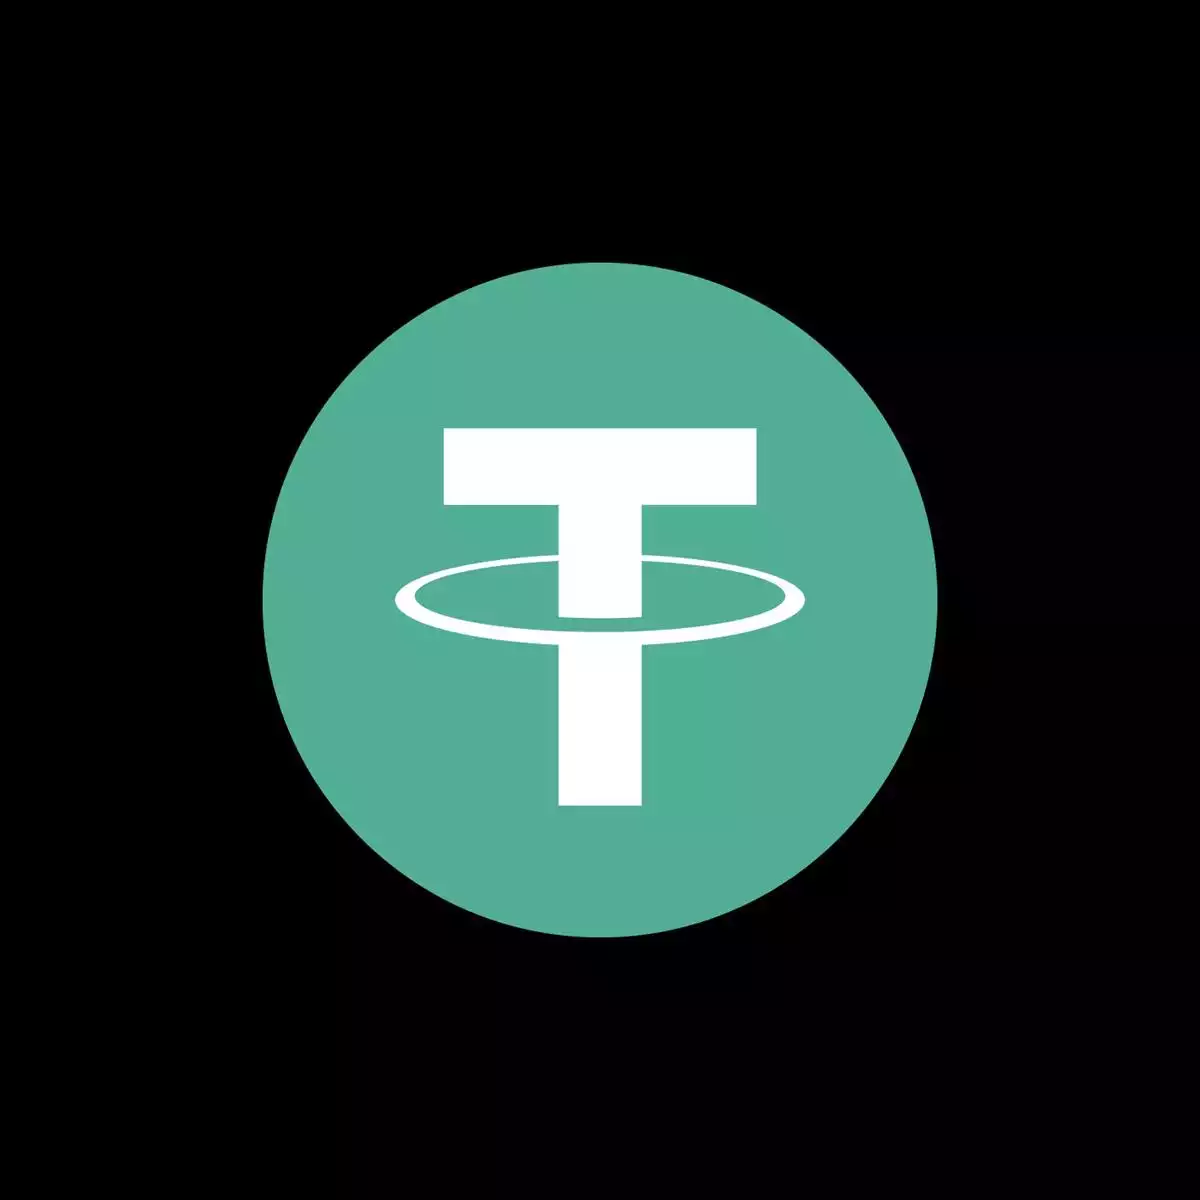 ainslie tether (usdt)tether is a unique cryptocurrency in that it is pegged to the us dollar. unlike most of the other cryptocurrencies, it is heavily...